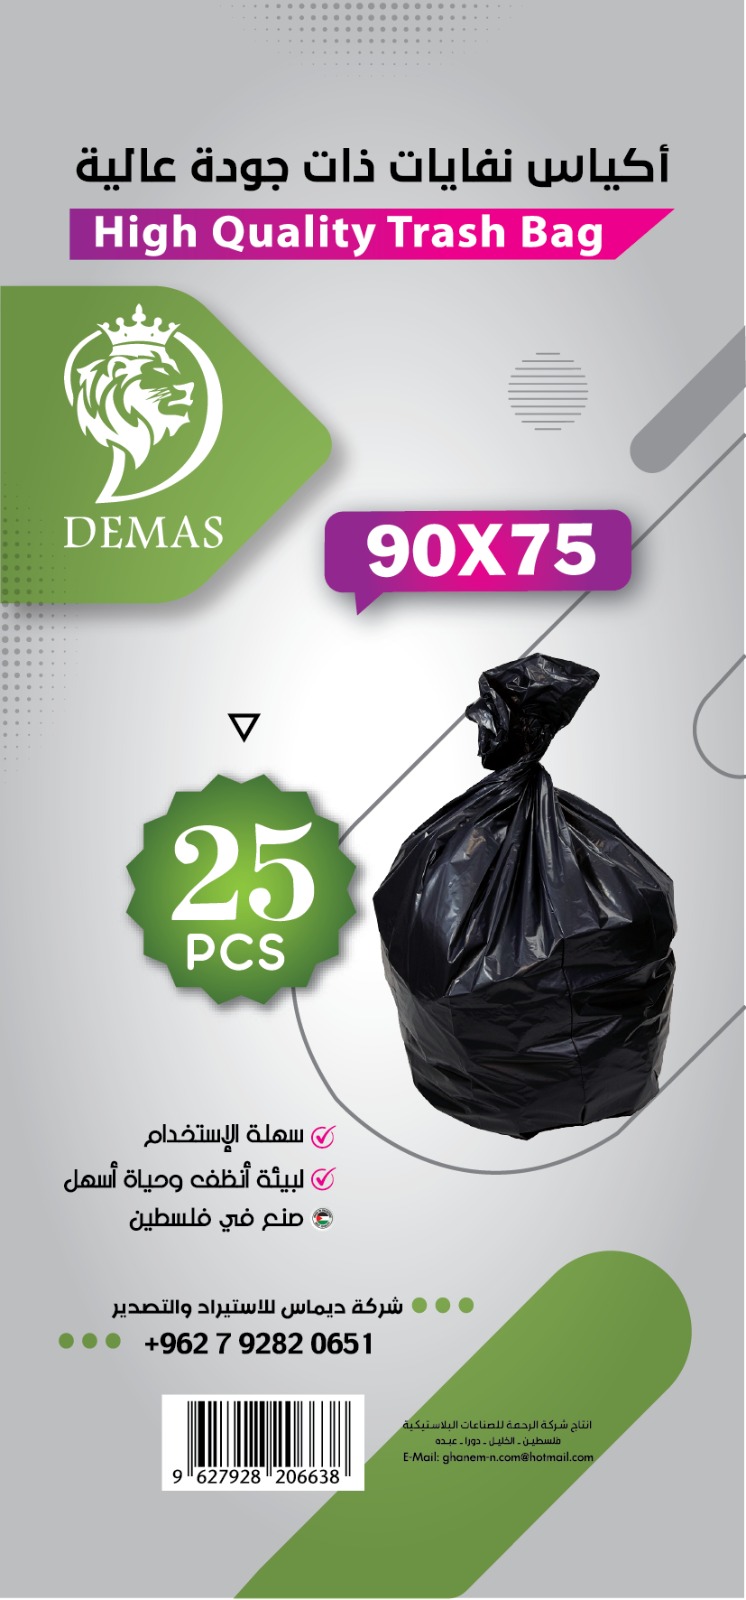 Trash bags 75*90 cm, rolls of 30 from DEMAS